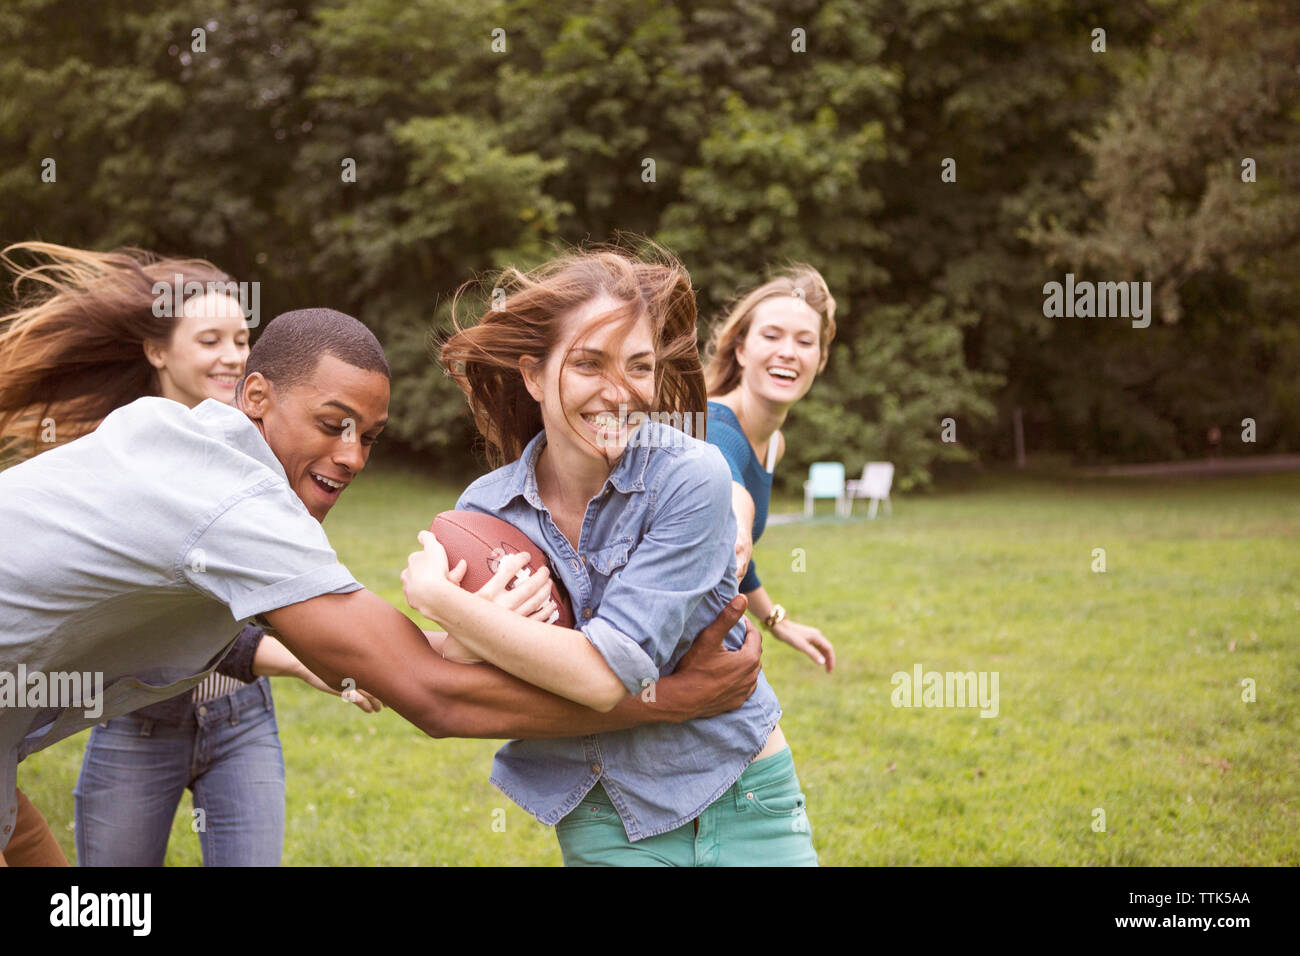 Man pulling woman holding football ball while friends running in background on field Stock Photo